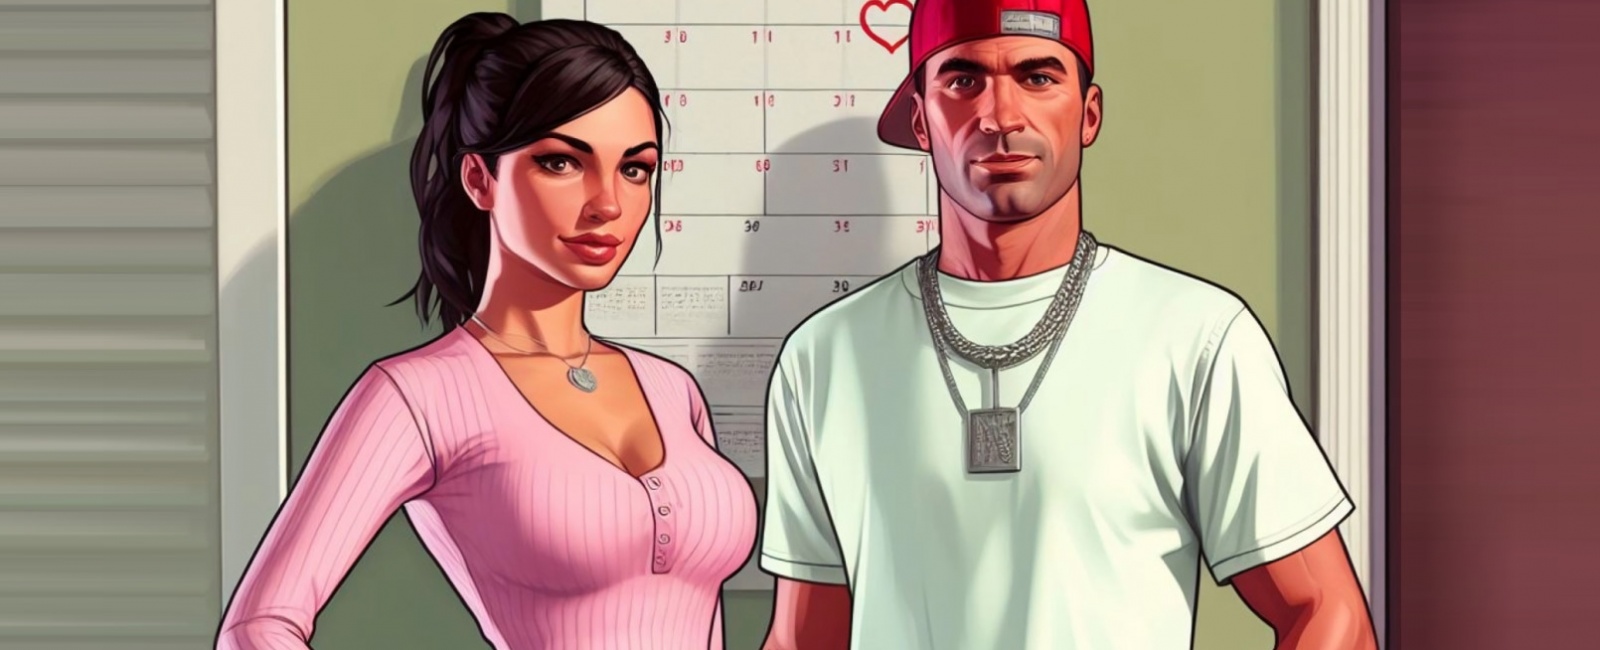 GTA 6 Metacritic page suddenly appears, voice actor posts tease